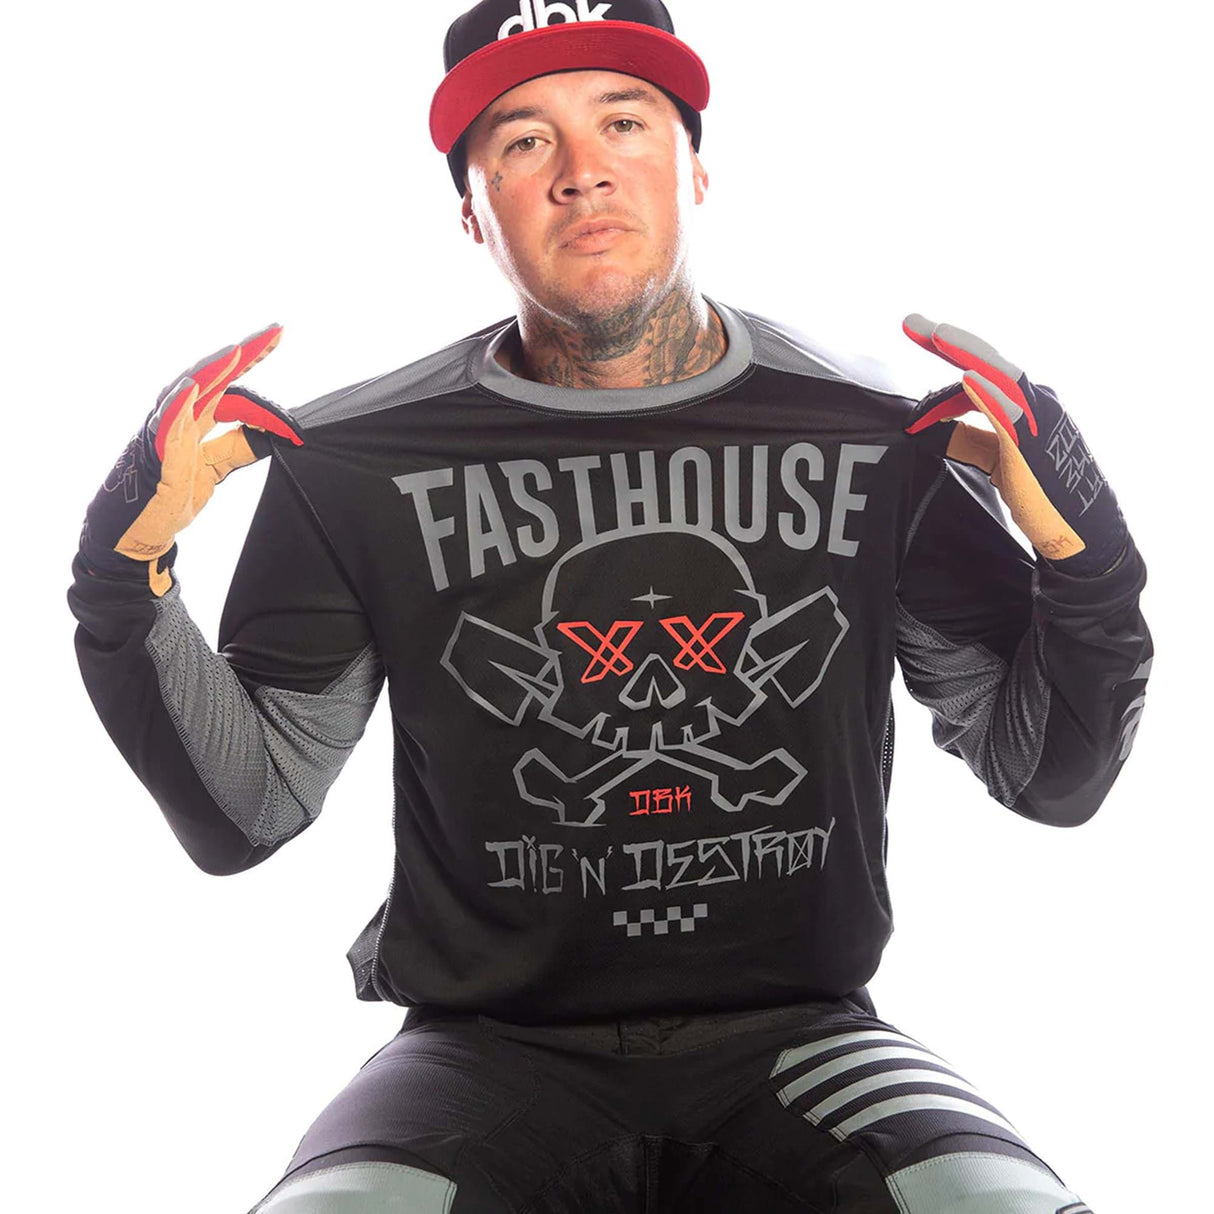 Fasthouse Twitch Long Sleeve Jersey